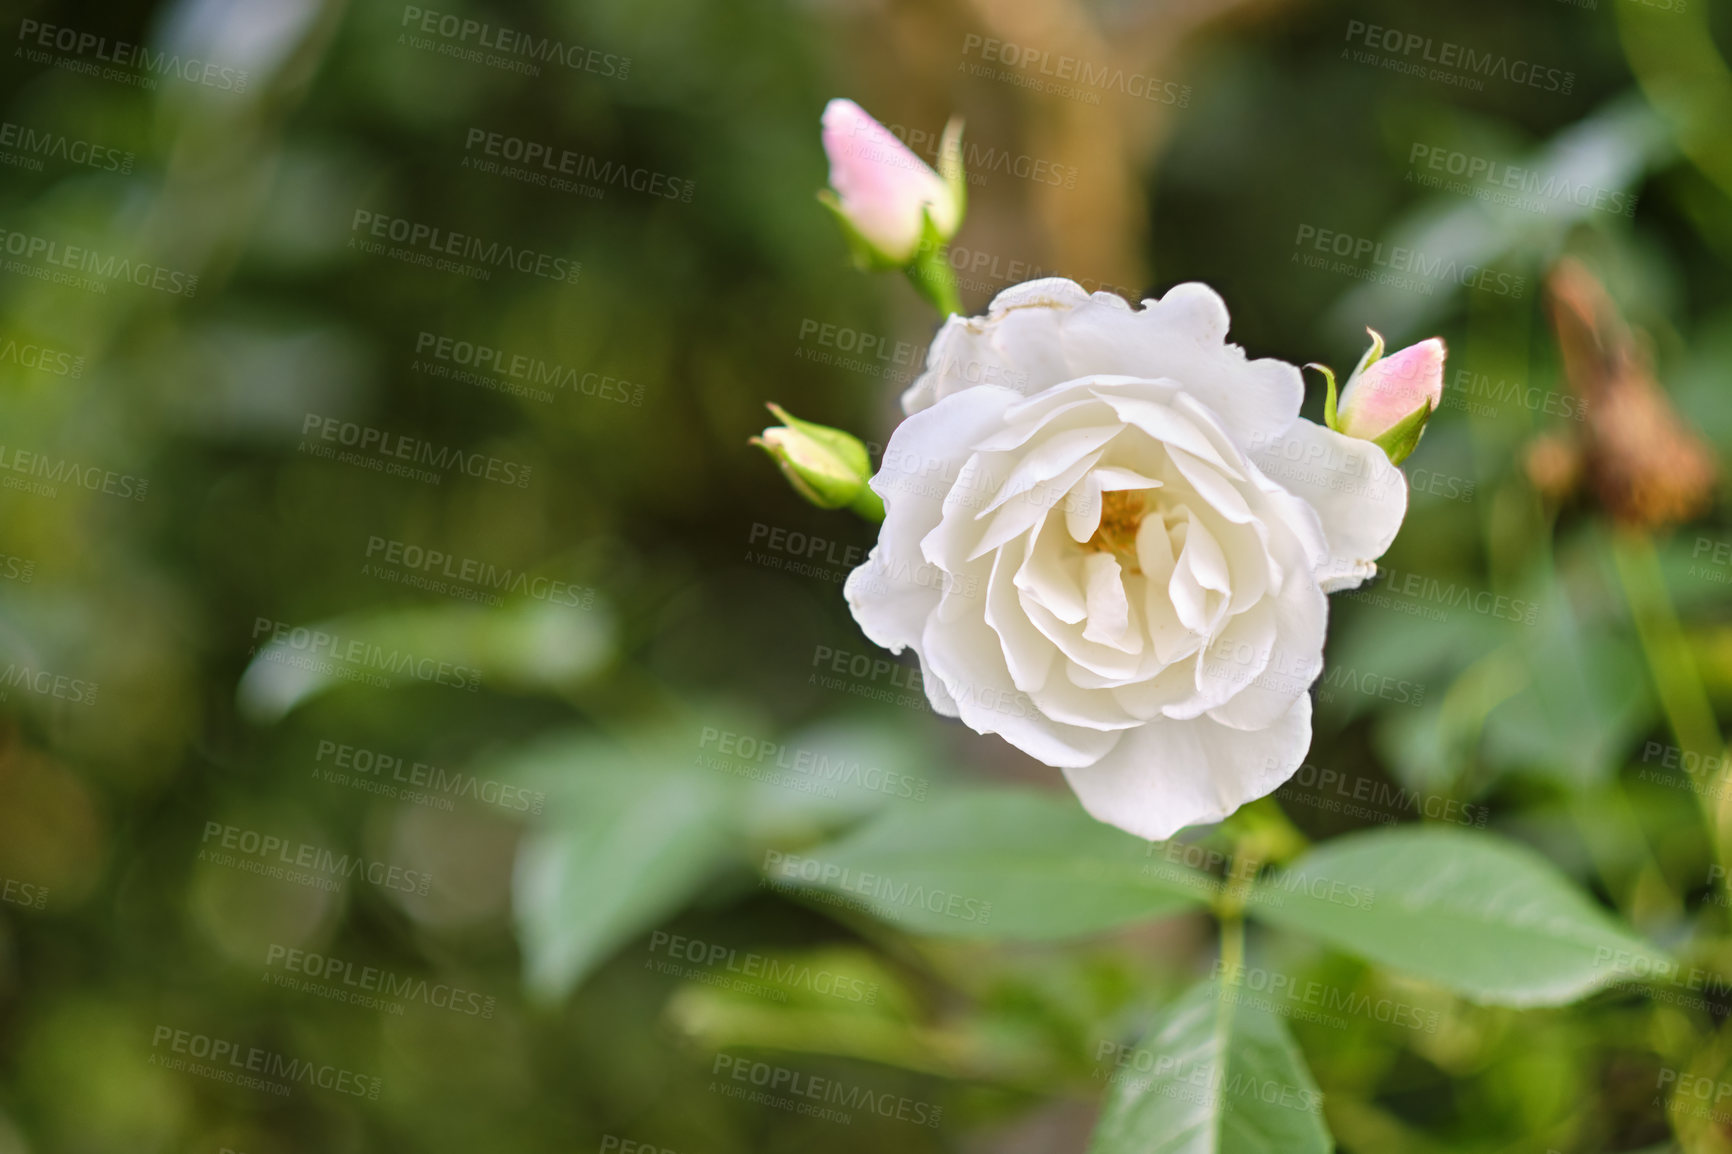 Buy stock photo A photo of a beautiful rose